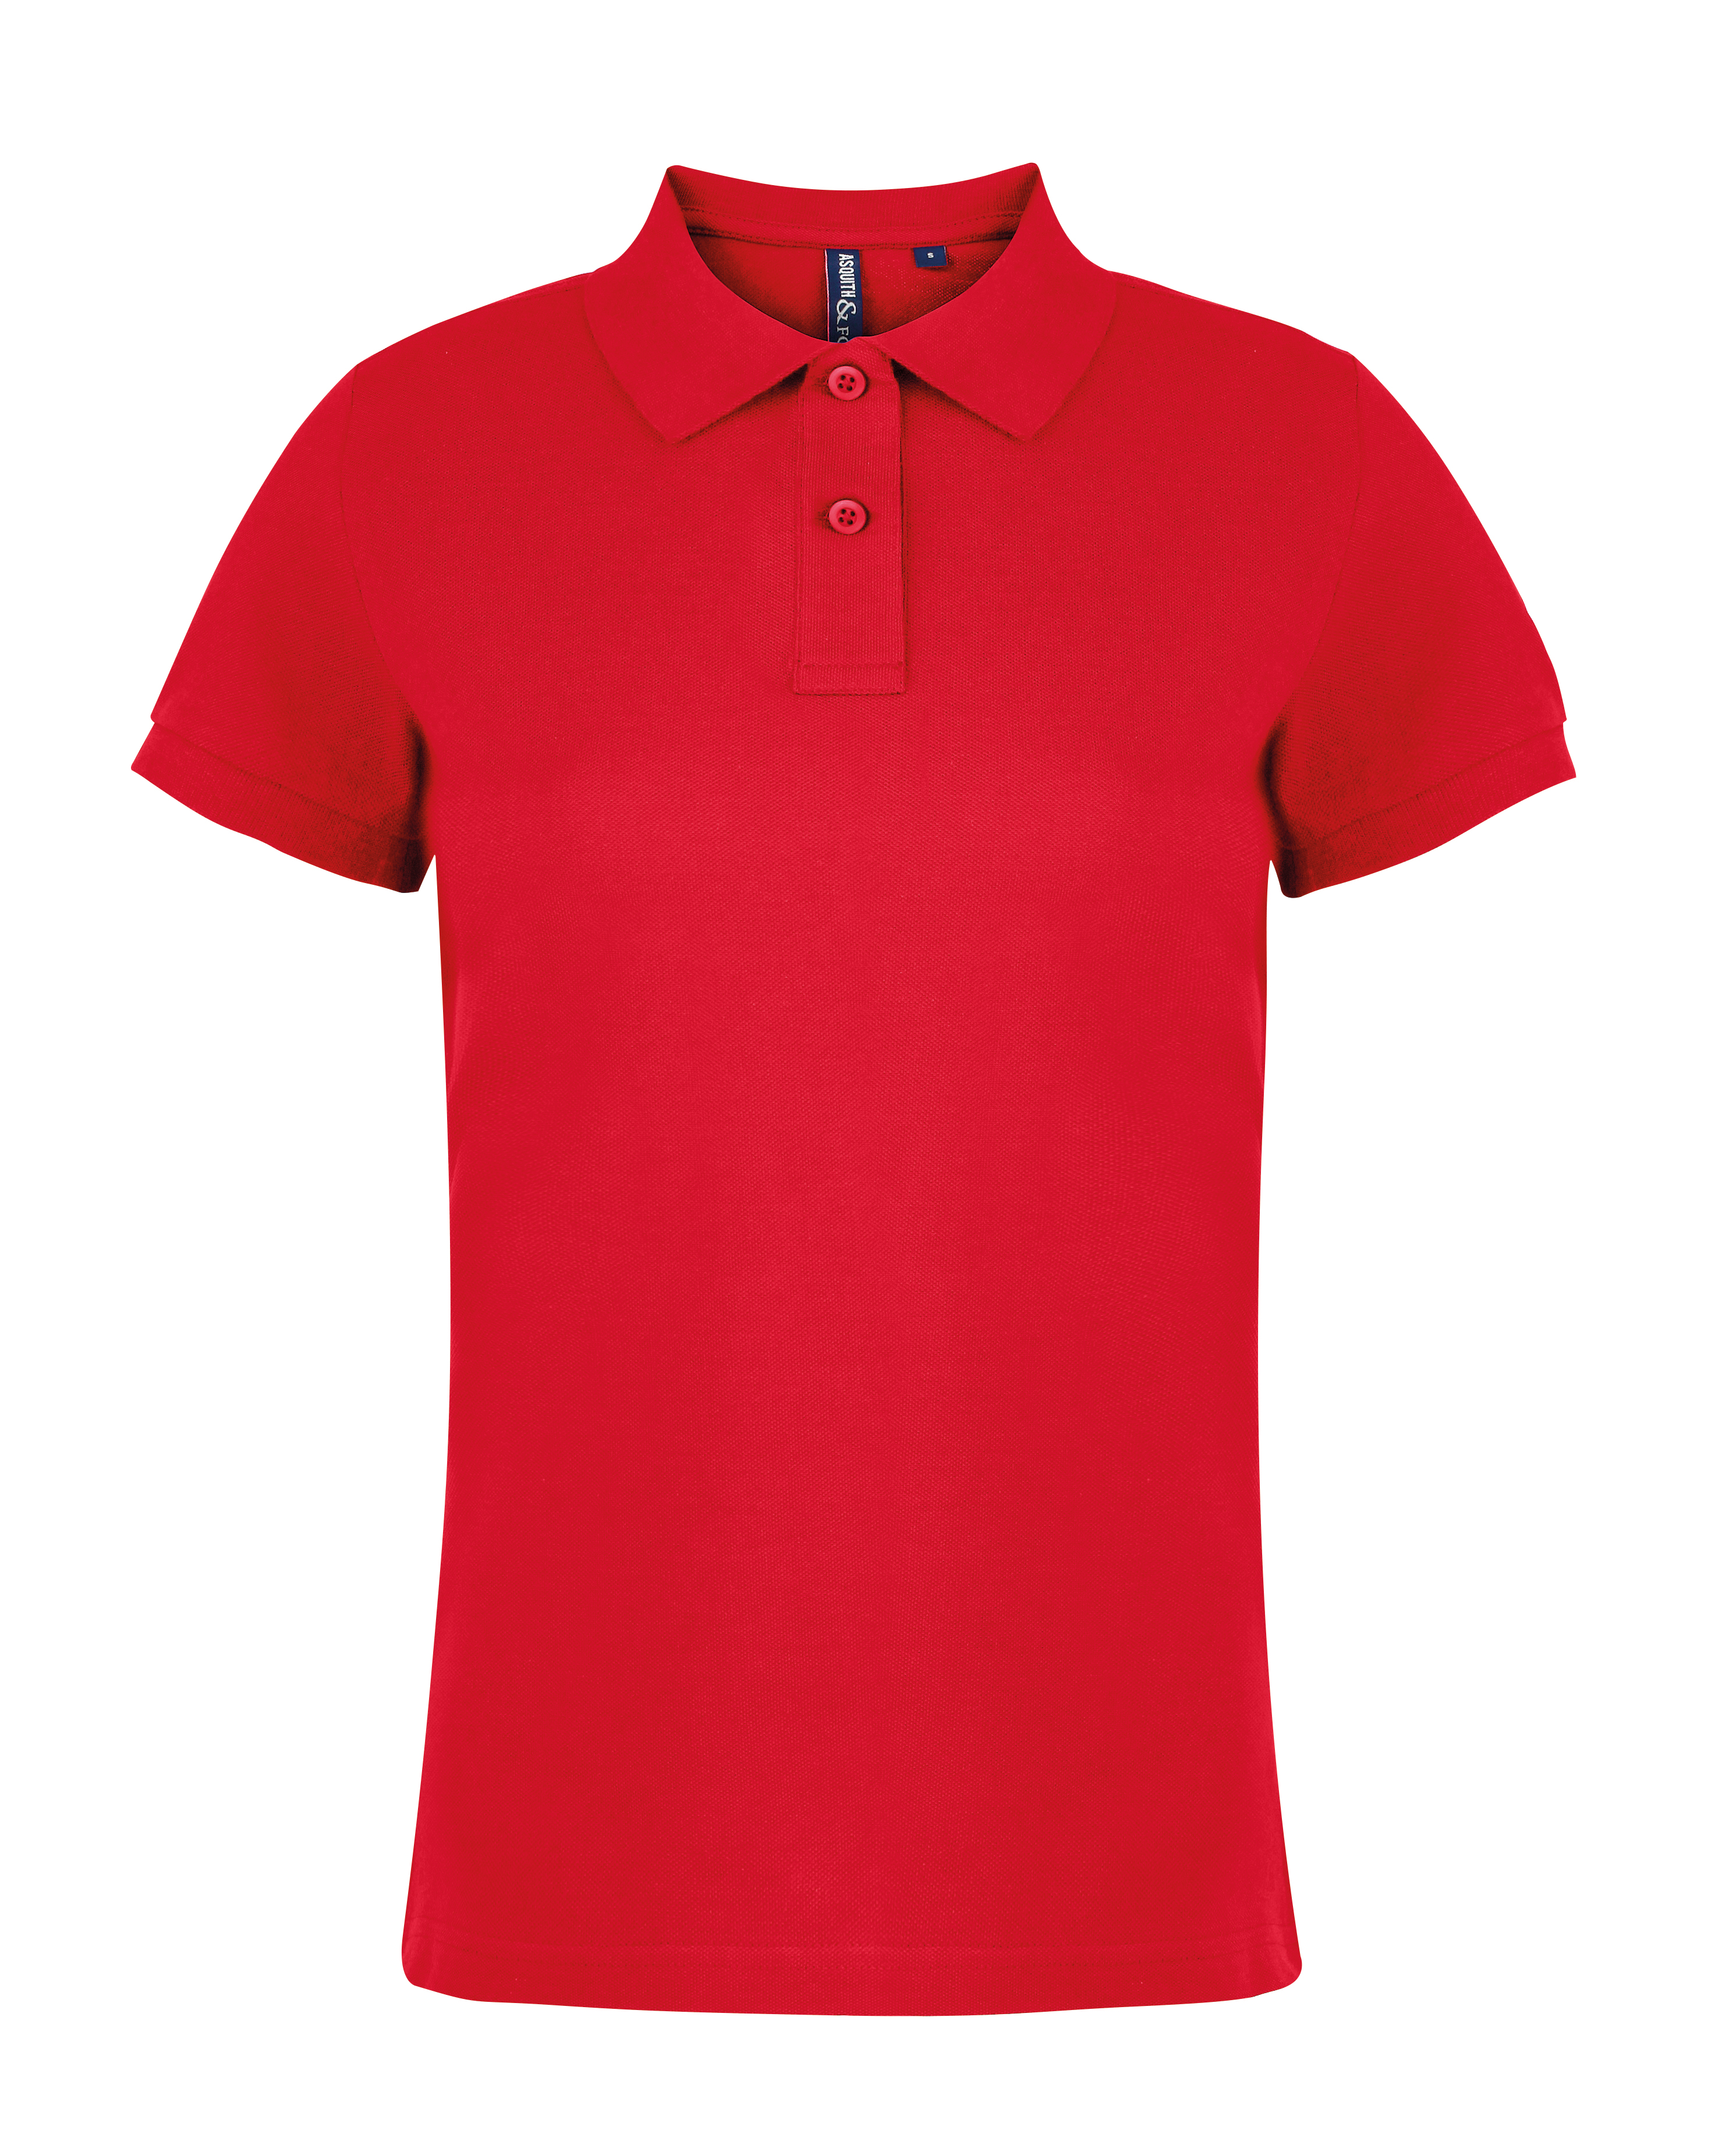 ax-httpswebsystems.s3.amazonaws.comtmp_for_downloadasquith-and-fox-womens-polo-red.jpg